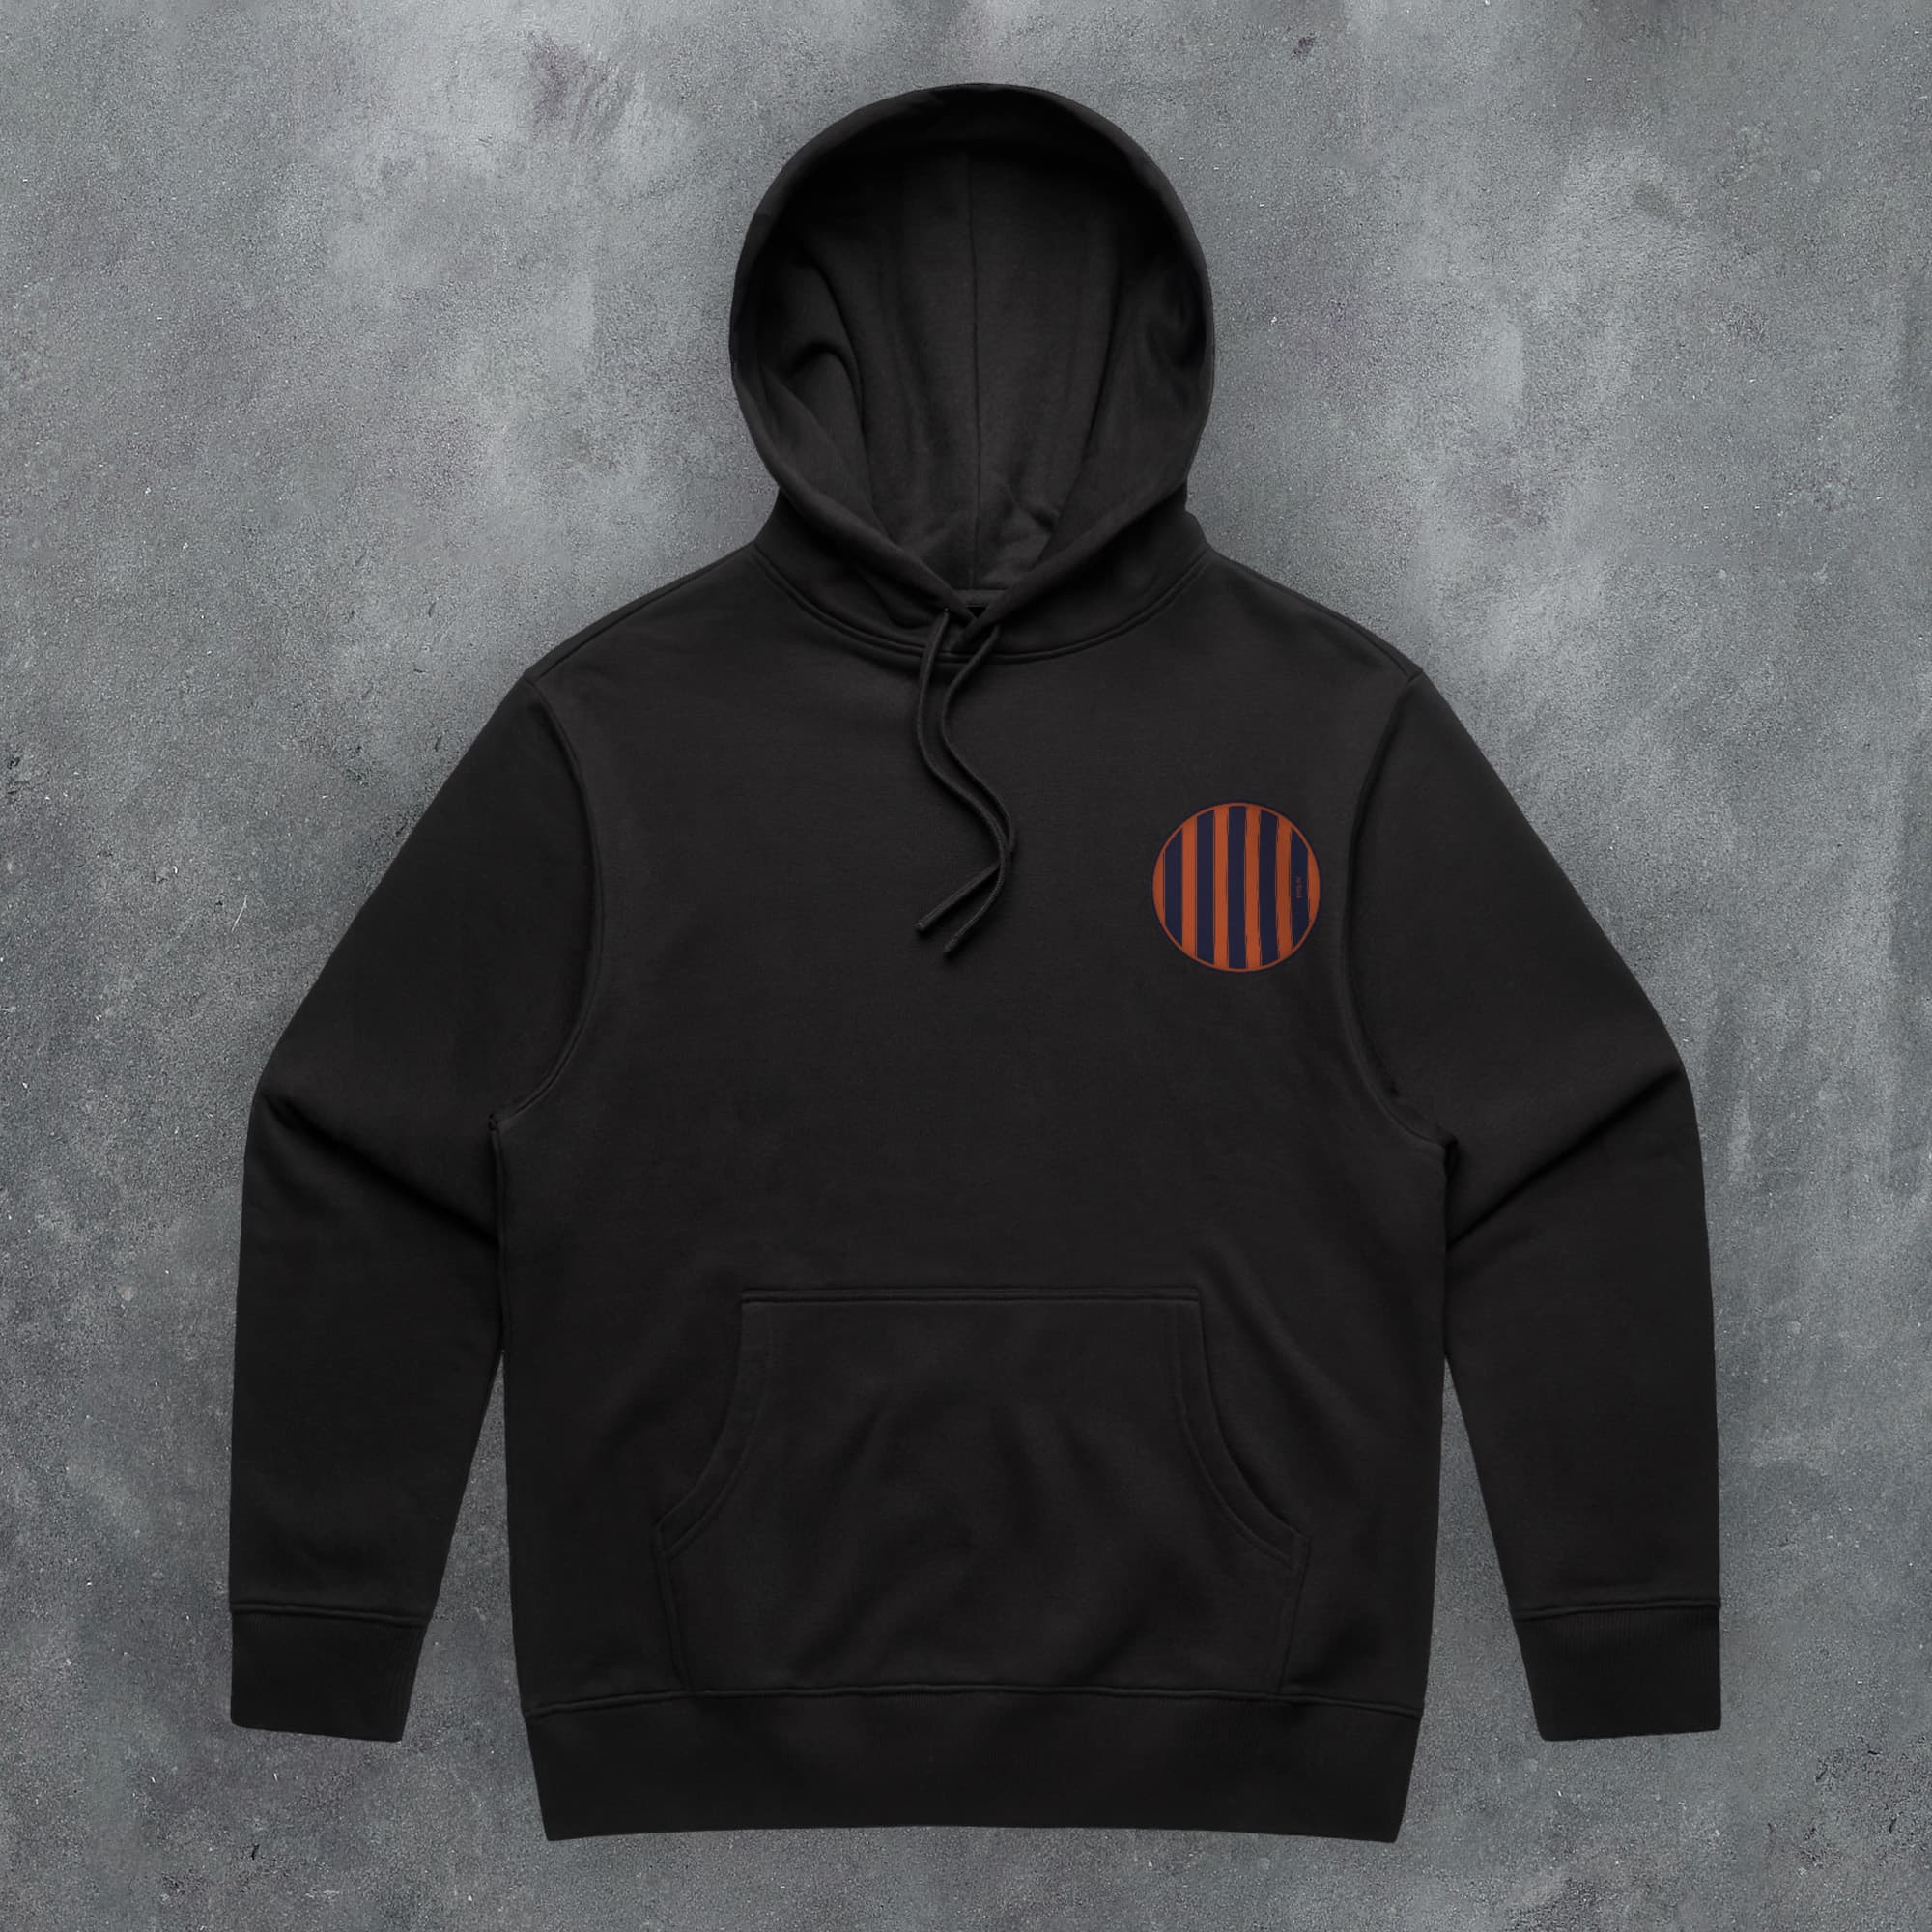 a black hoodie with a red stripe on the chest